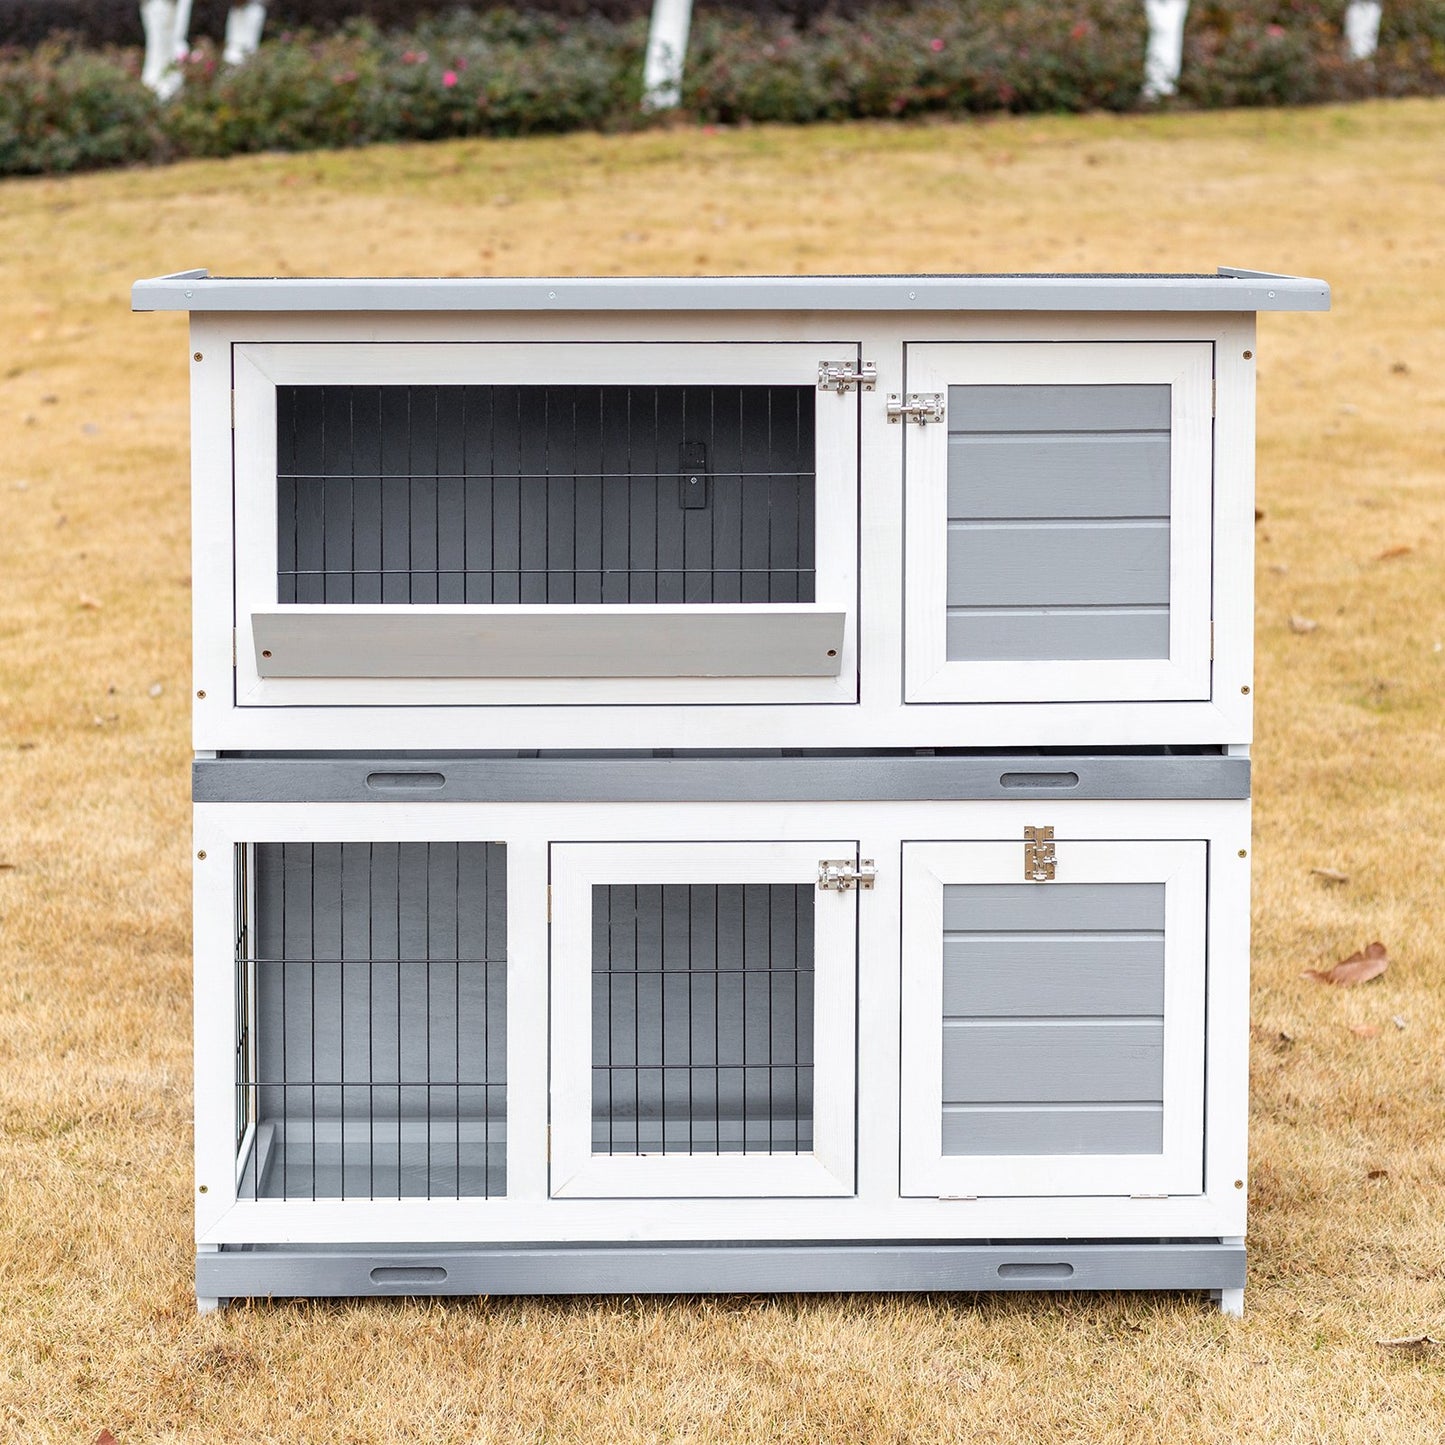 Arlopu 42.3" Rabbit Hutch, Wooden Bunny Cage Chicken Coop, Outdoor Backyard Bunny House, 2-Story Cage for Small Animals